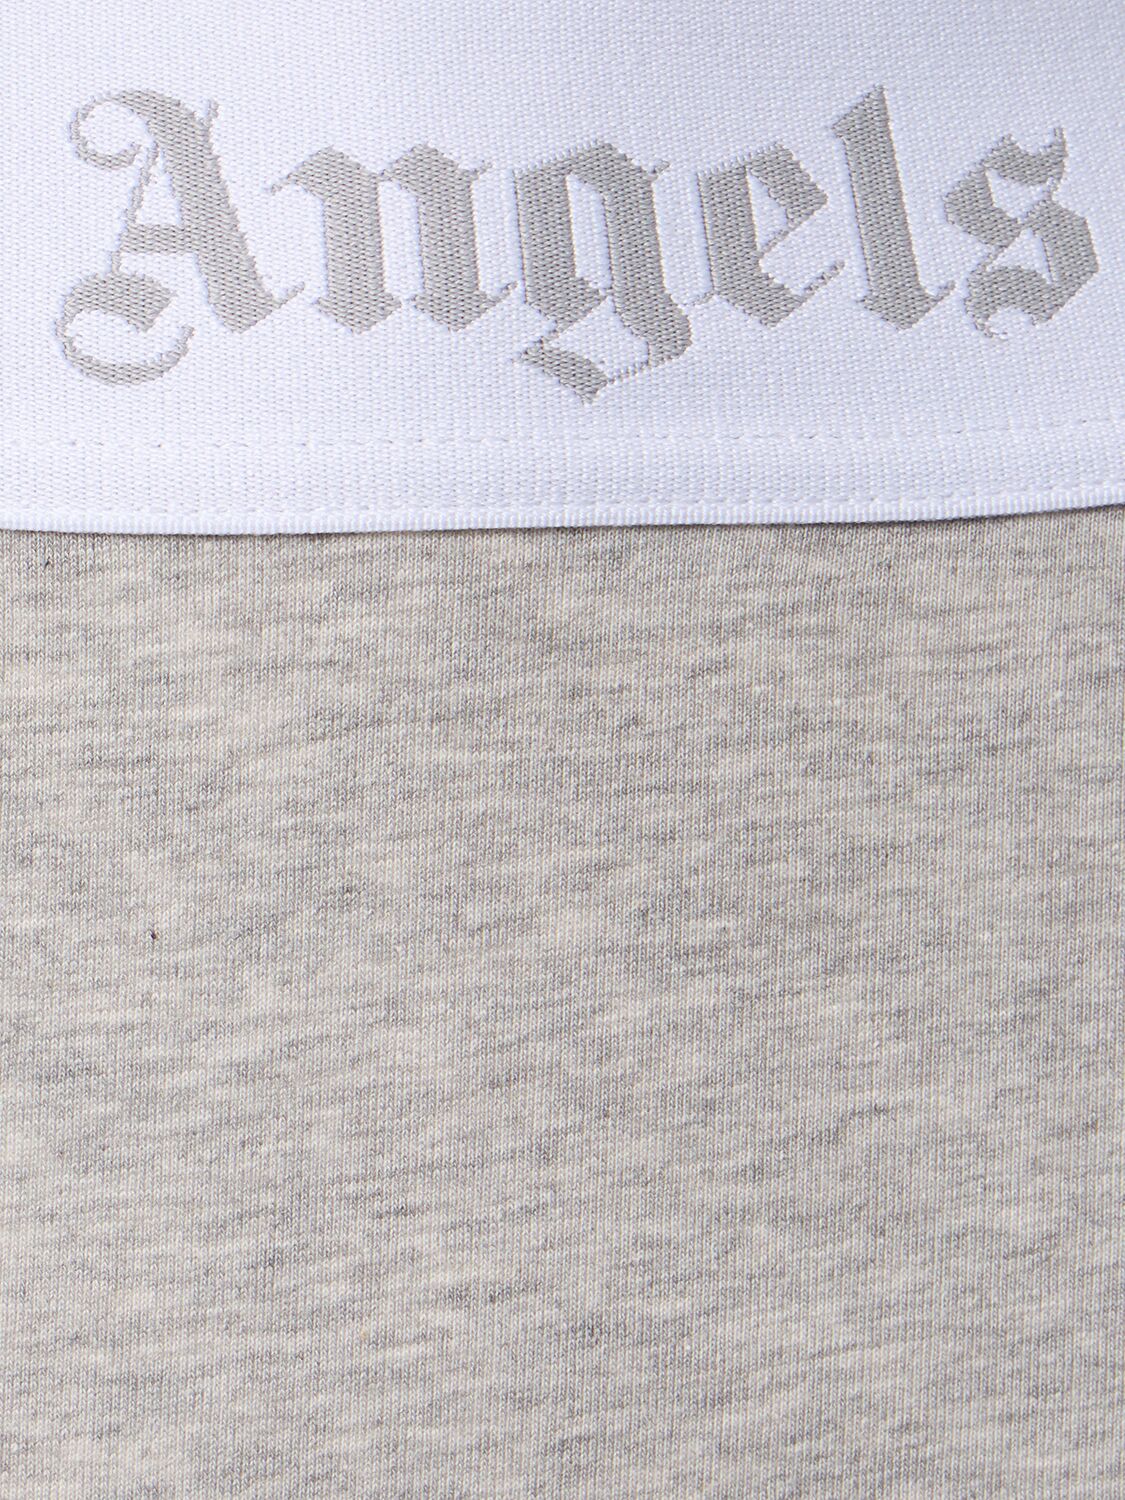 Shop Palm Angels Classic Logo High Rise Cotton Briefs In Grey